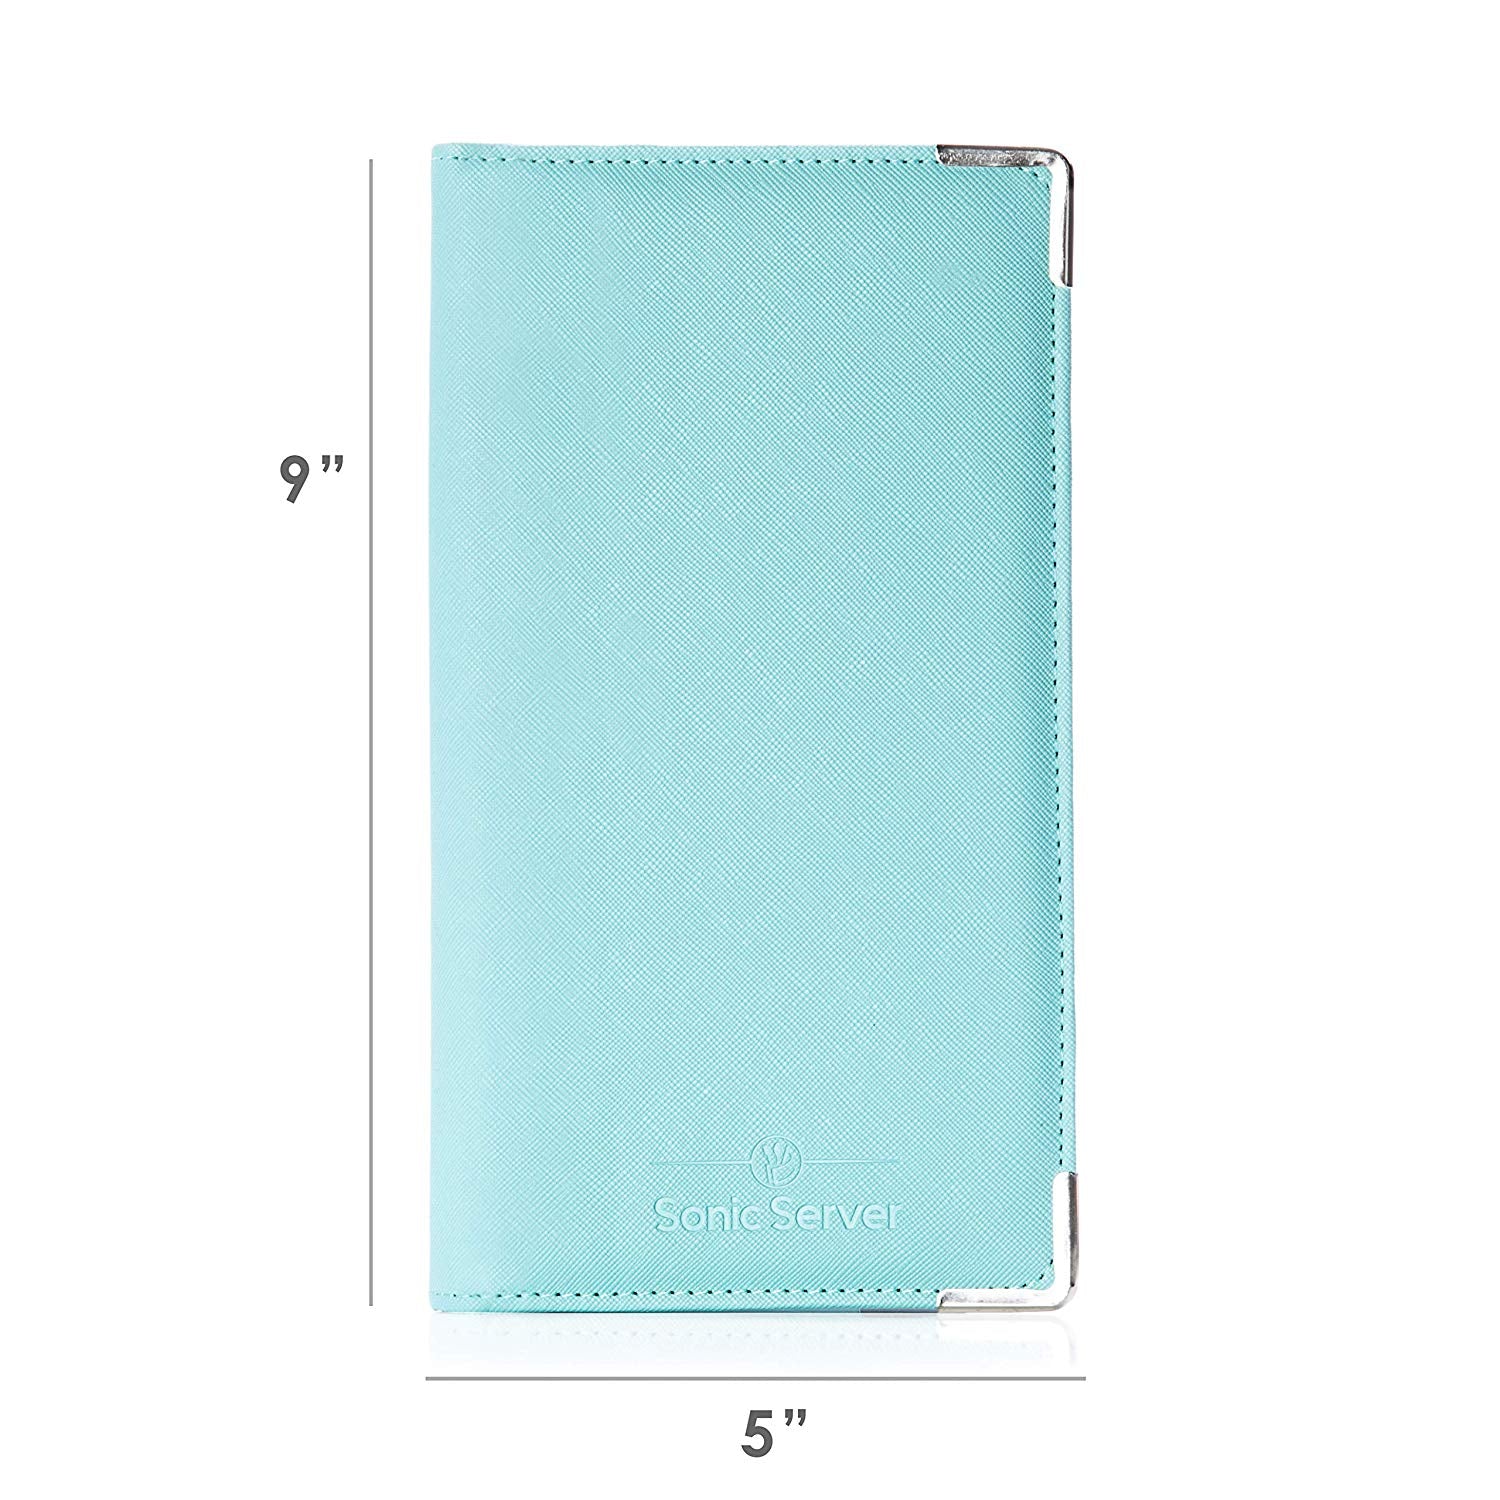 Sonic Server 5x9 11-Pocket Server Book Organizer with Double Magnetic Pockets, Zipper Pouch & Pen Holder for Waitress Waiter Waitstaff | Cross-Textured Teal | Fits Apron Holds Guest Checks